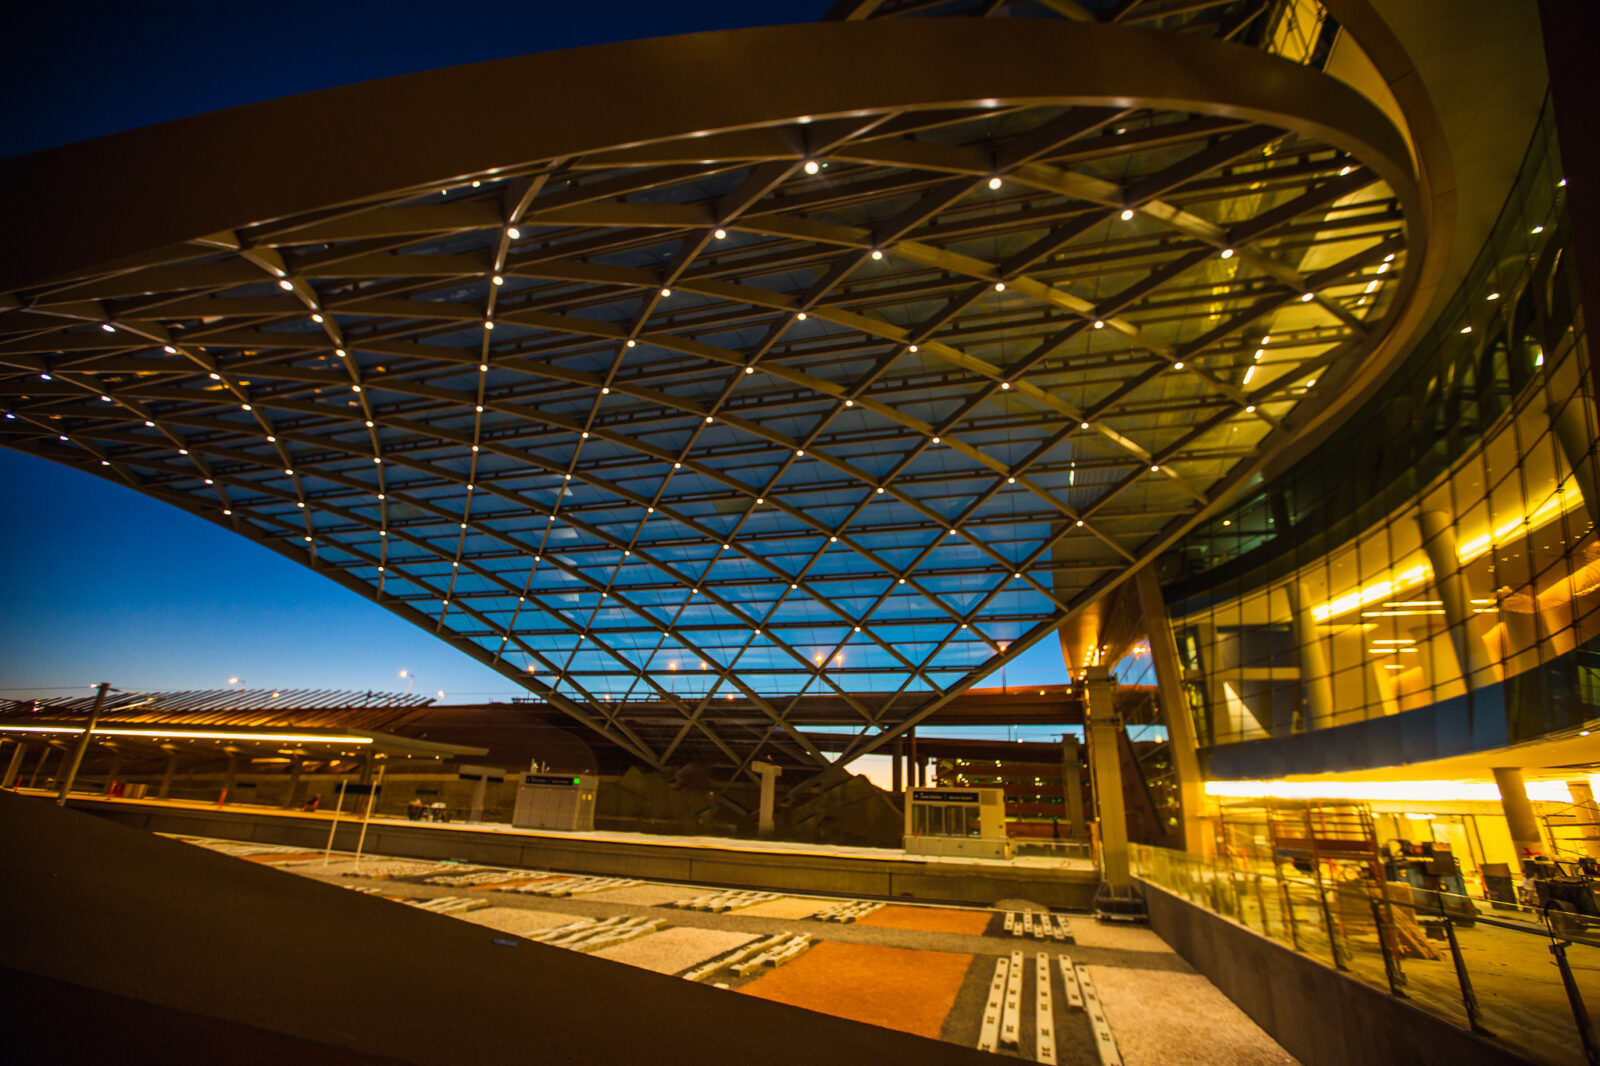 Lit up structural design outside of the Denver International Airports main terminal at night